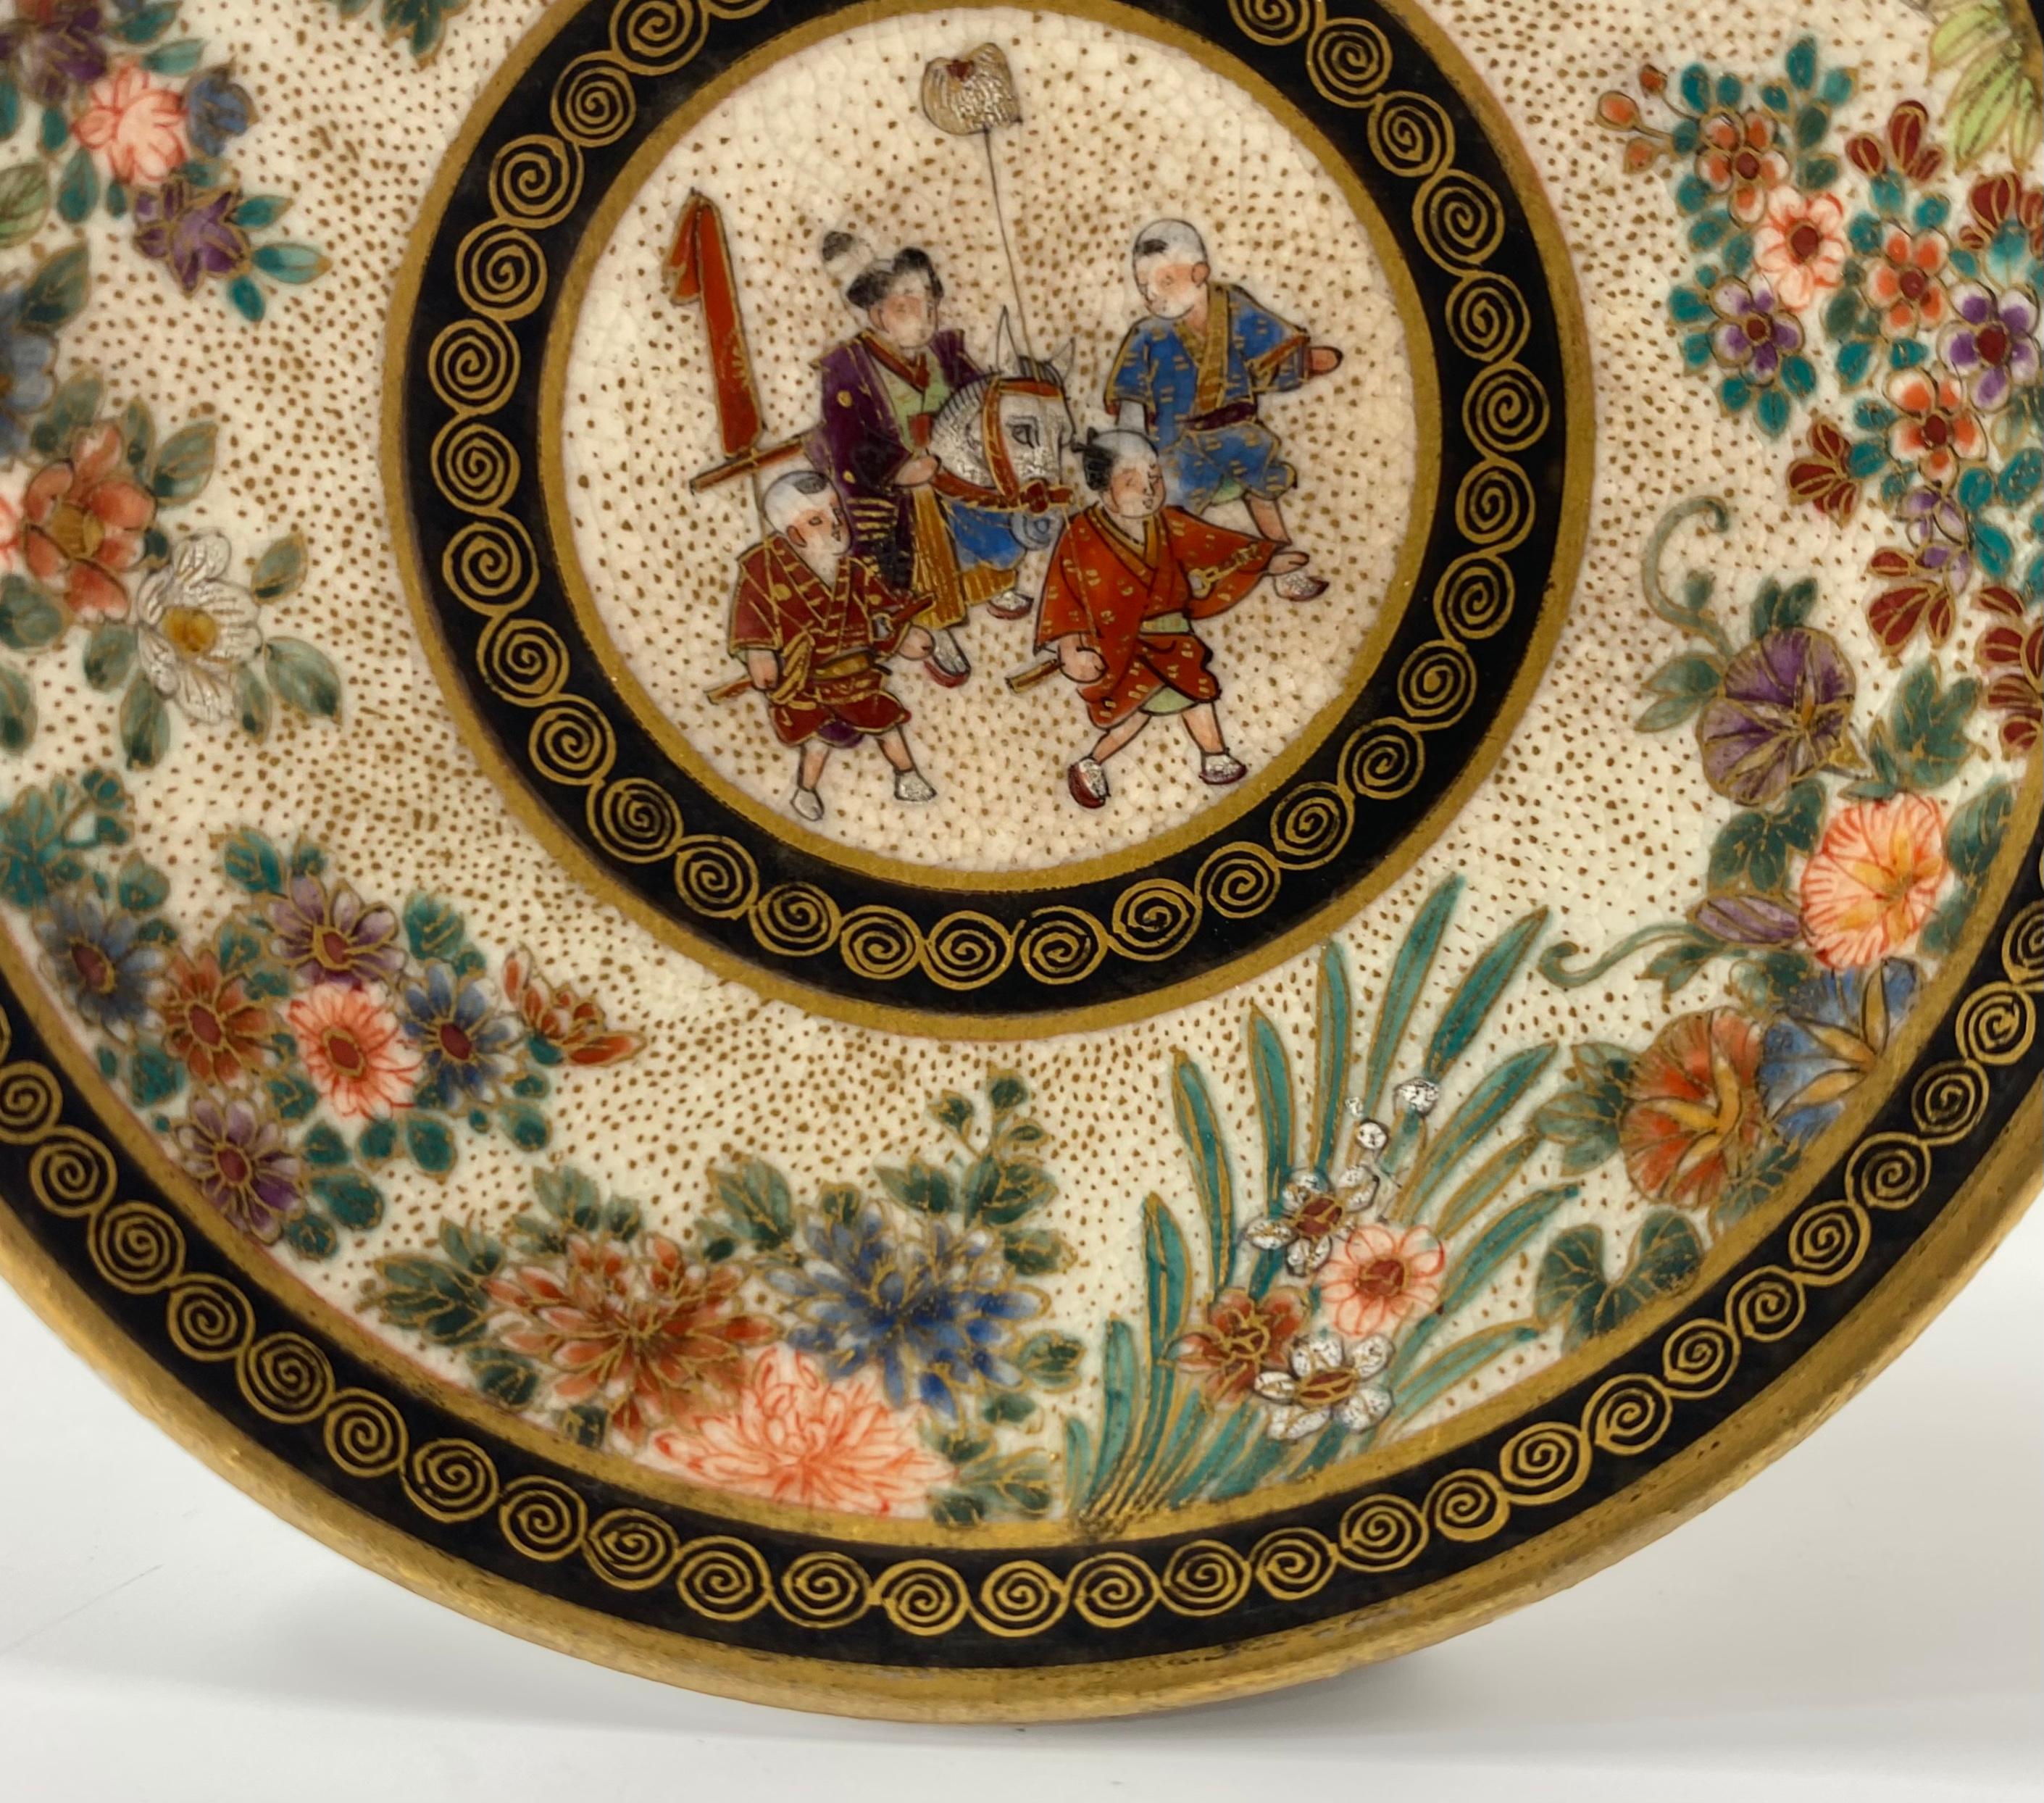 Satsuma pottery miniature dish, painted by Keizan, Meiji period. Hand painted to a central roundel, with a scene of boys in a procession, one riding a hobby horse.
The broad border painted with a continuous band of flowering plants, upon a gilt